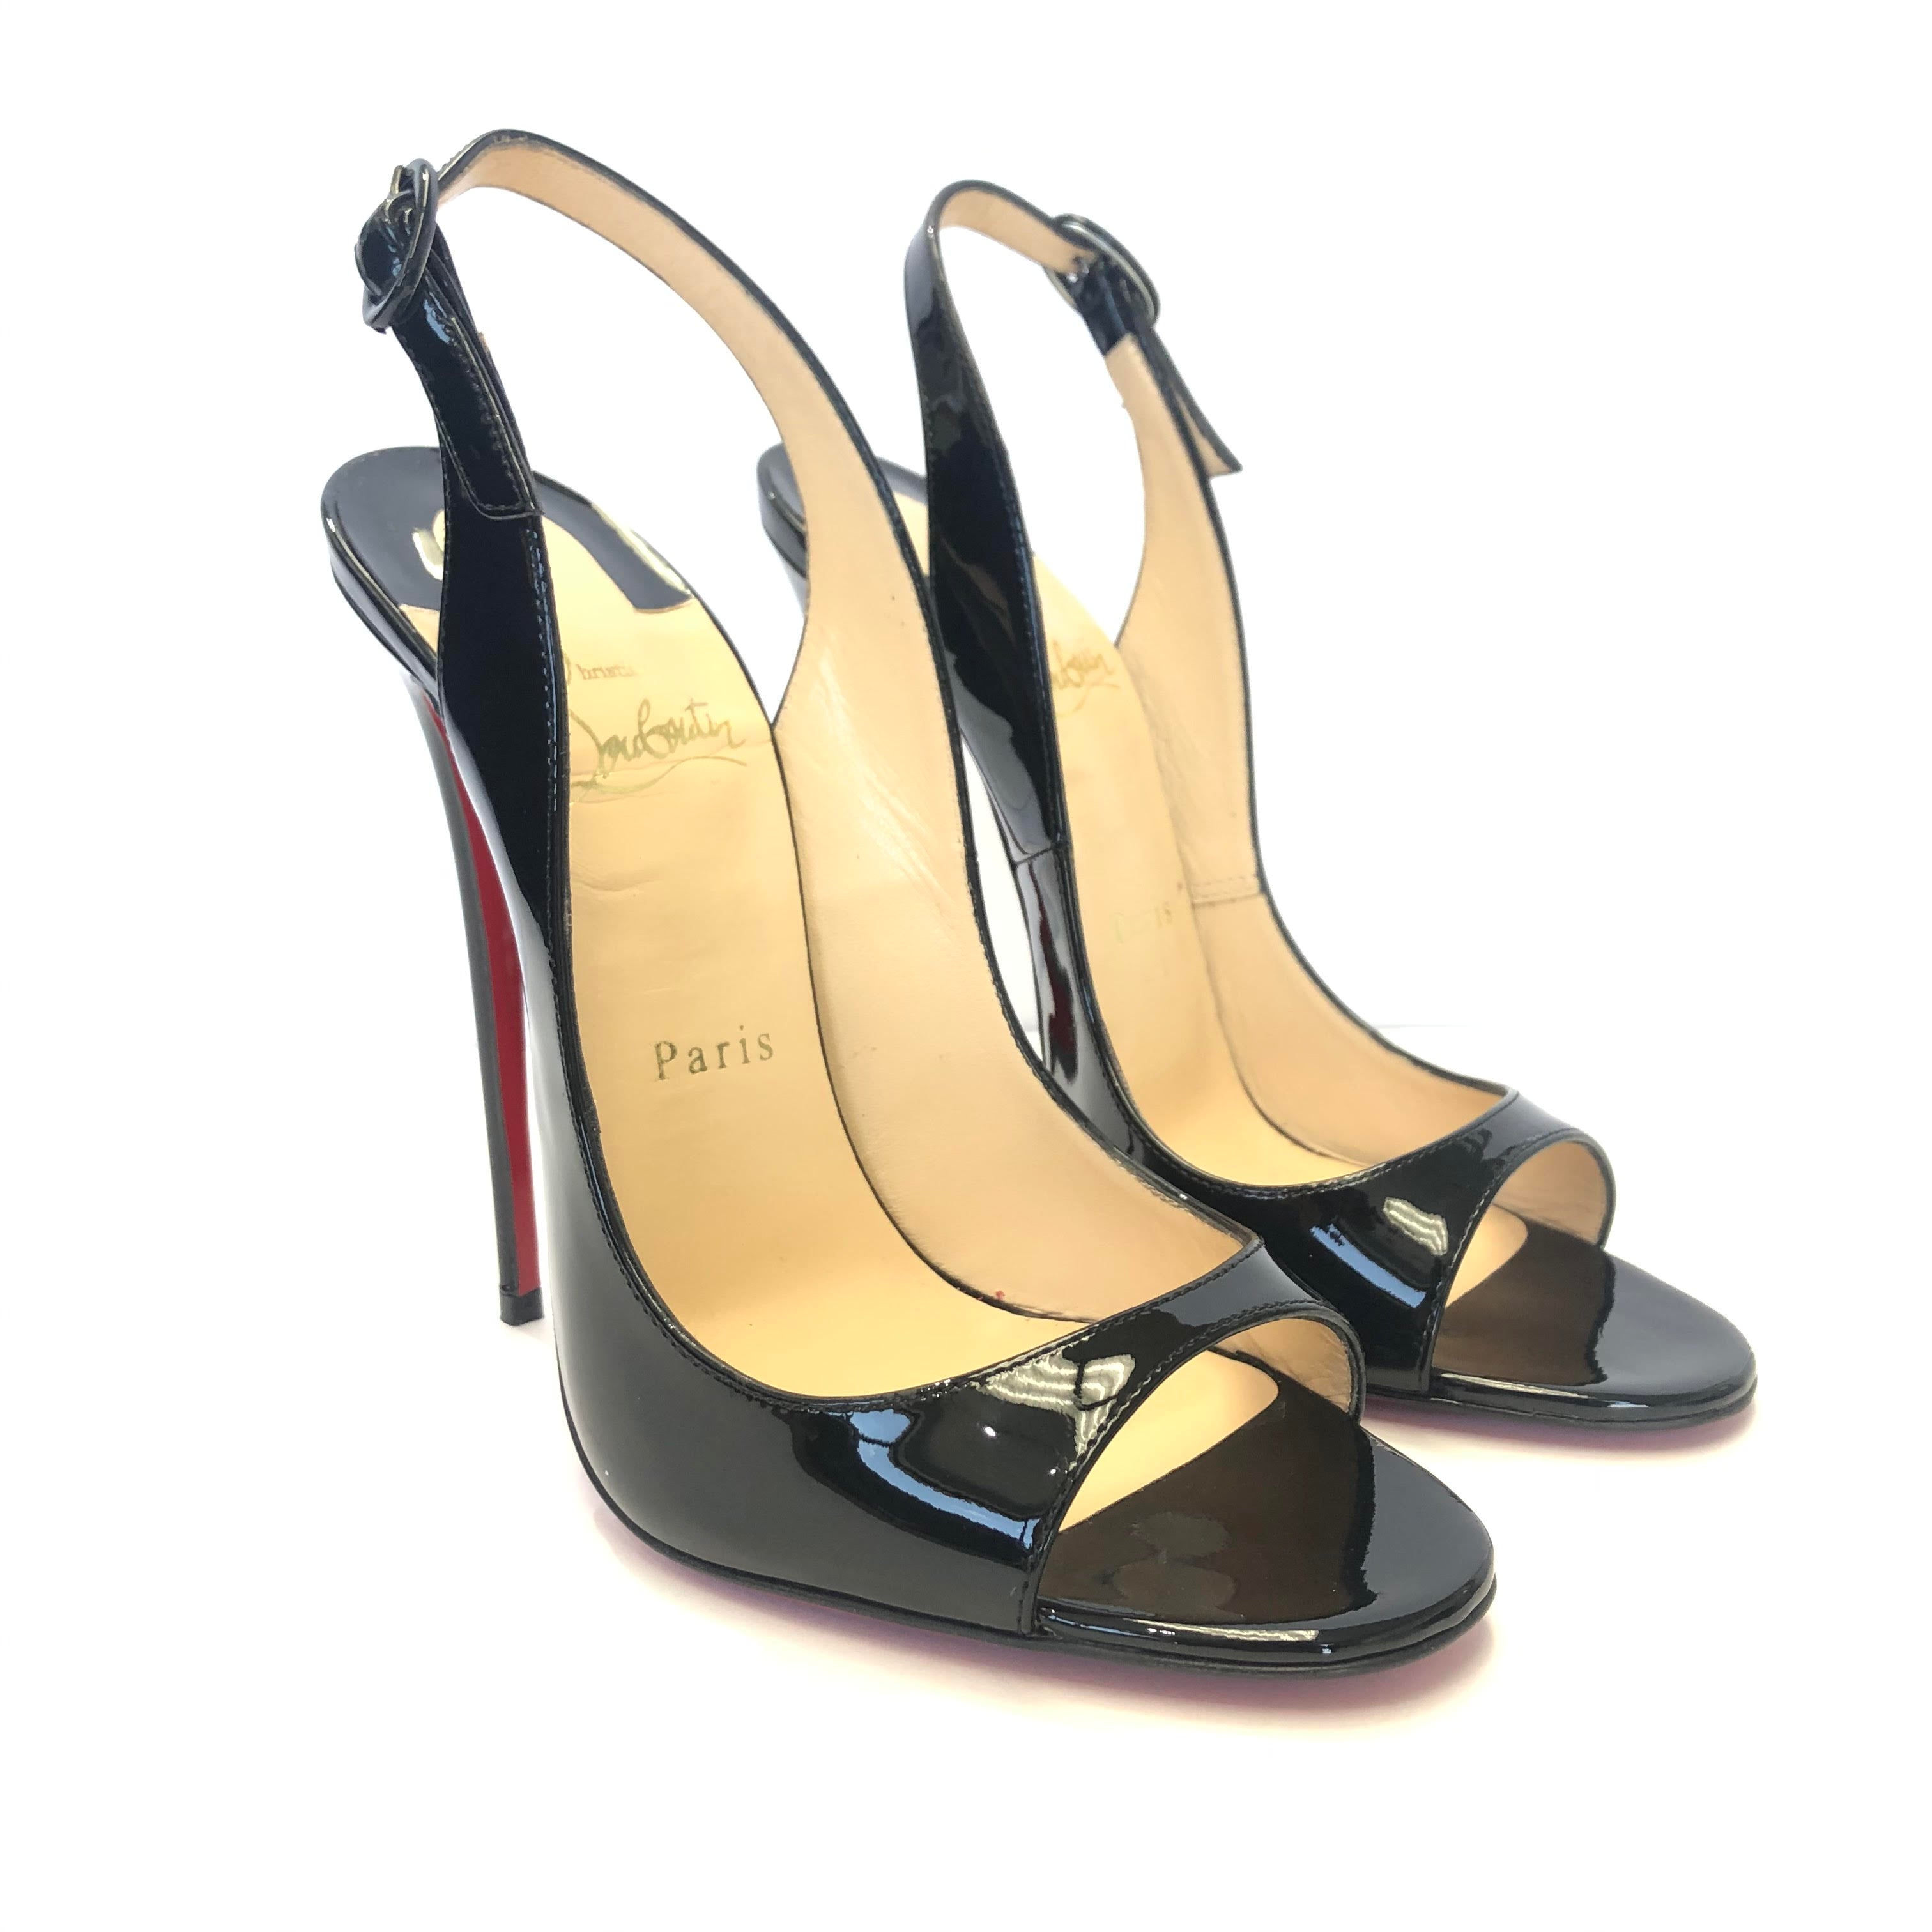 LOUBOUTIN SHOES / HEELS SERVICES WITH RETURN SHIPPING PRICE - £80+